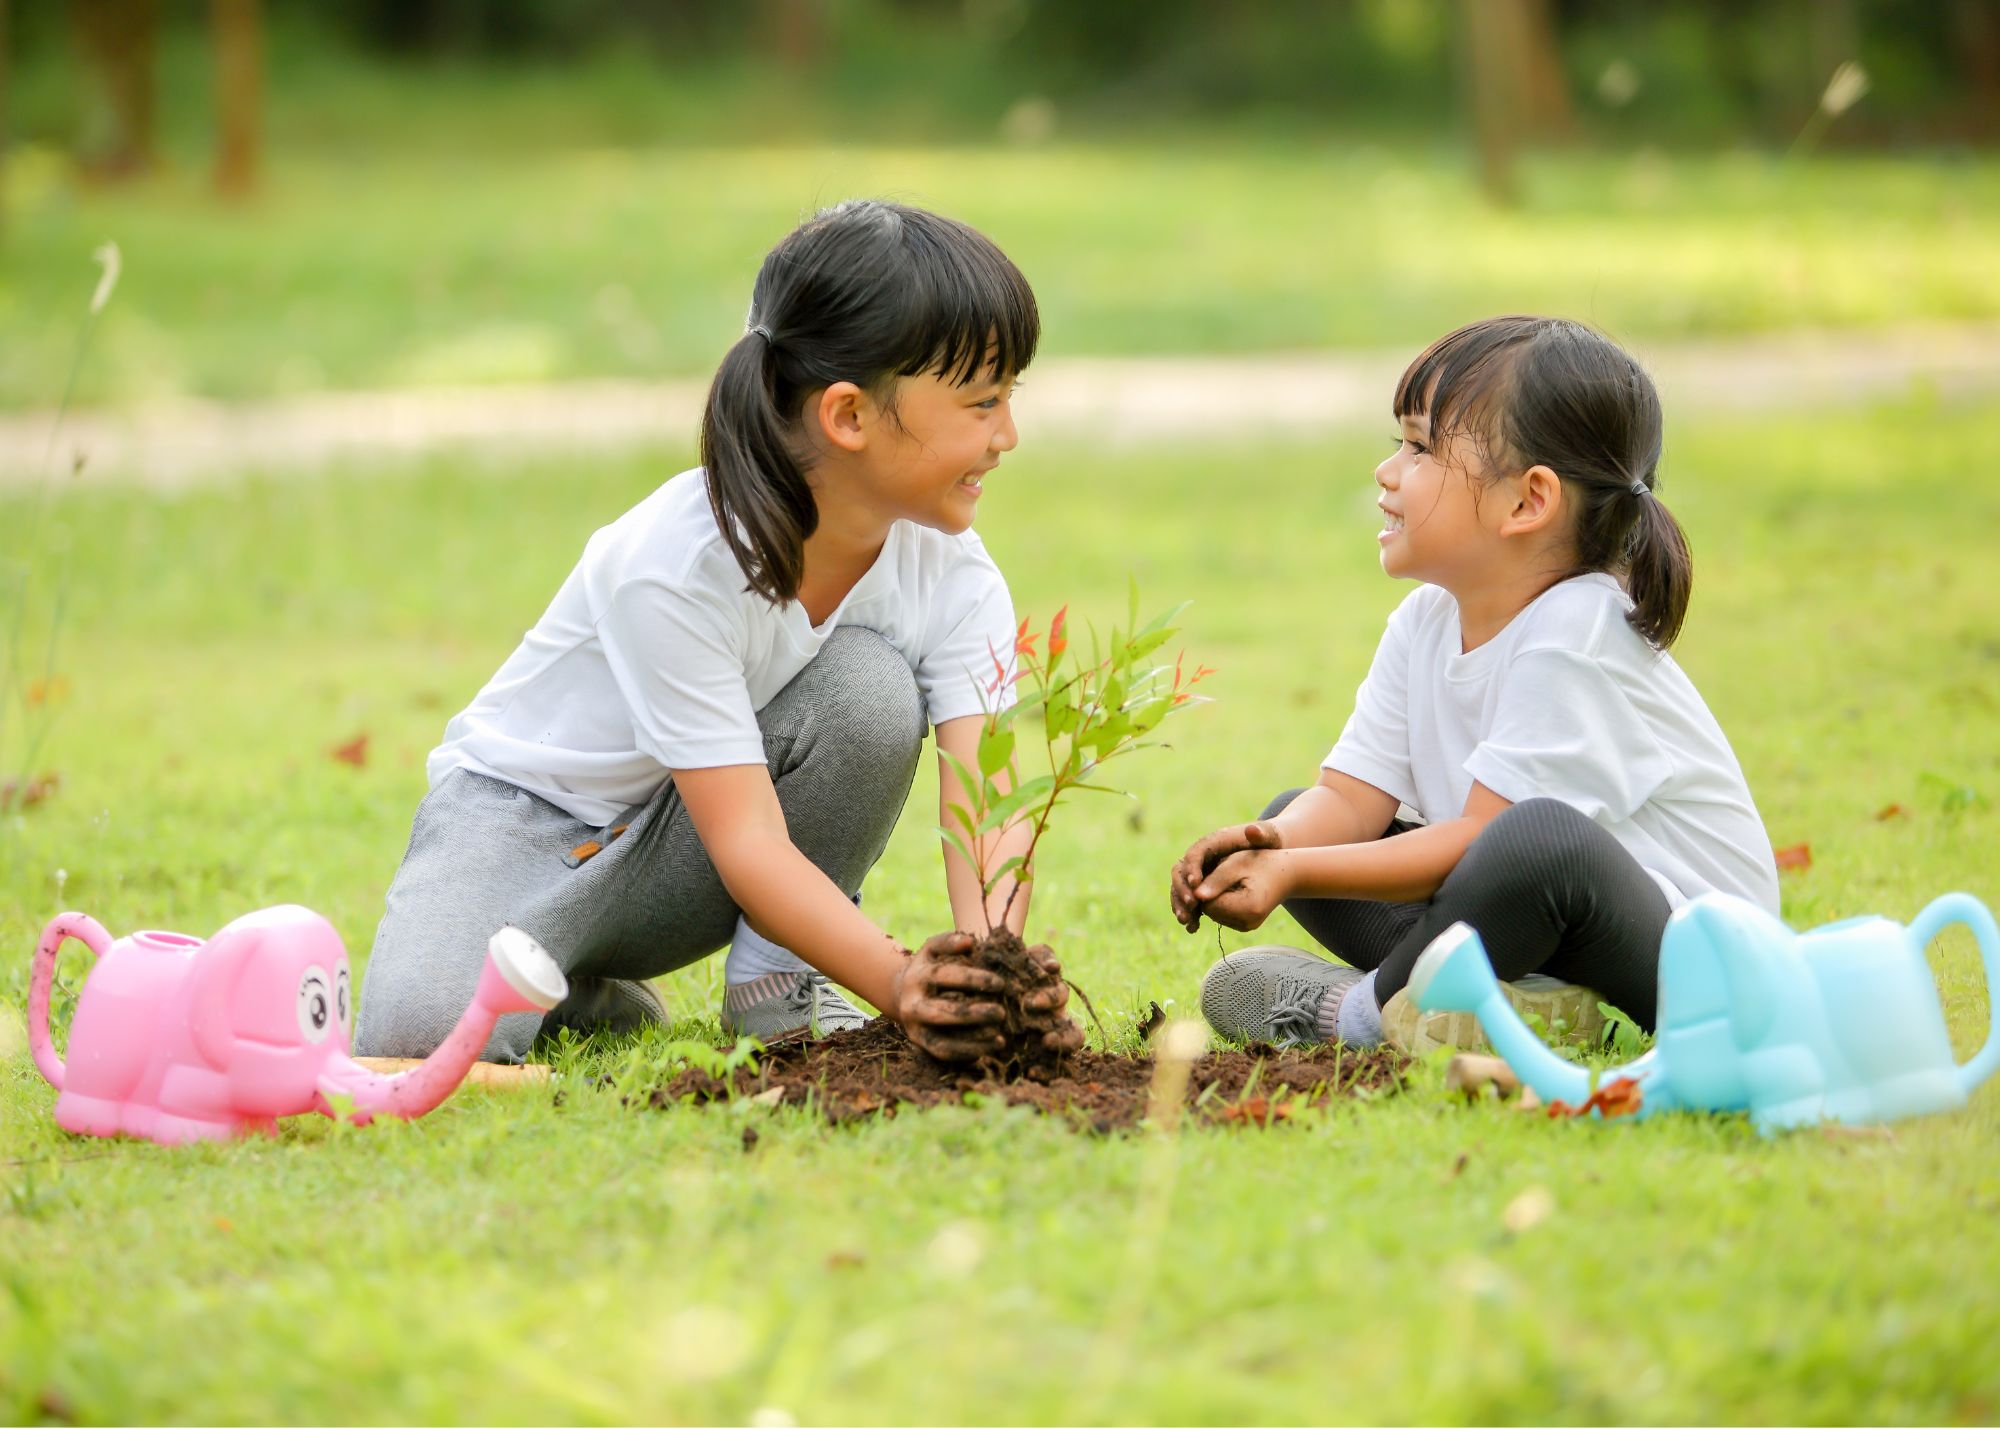 Two Asian girls planting a tree together.